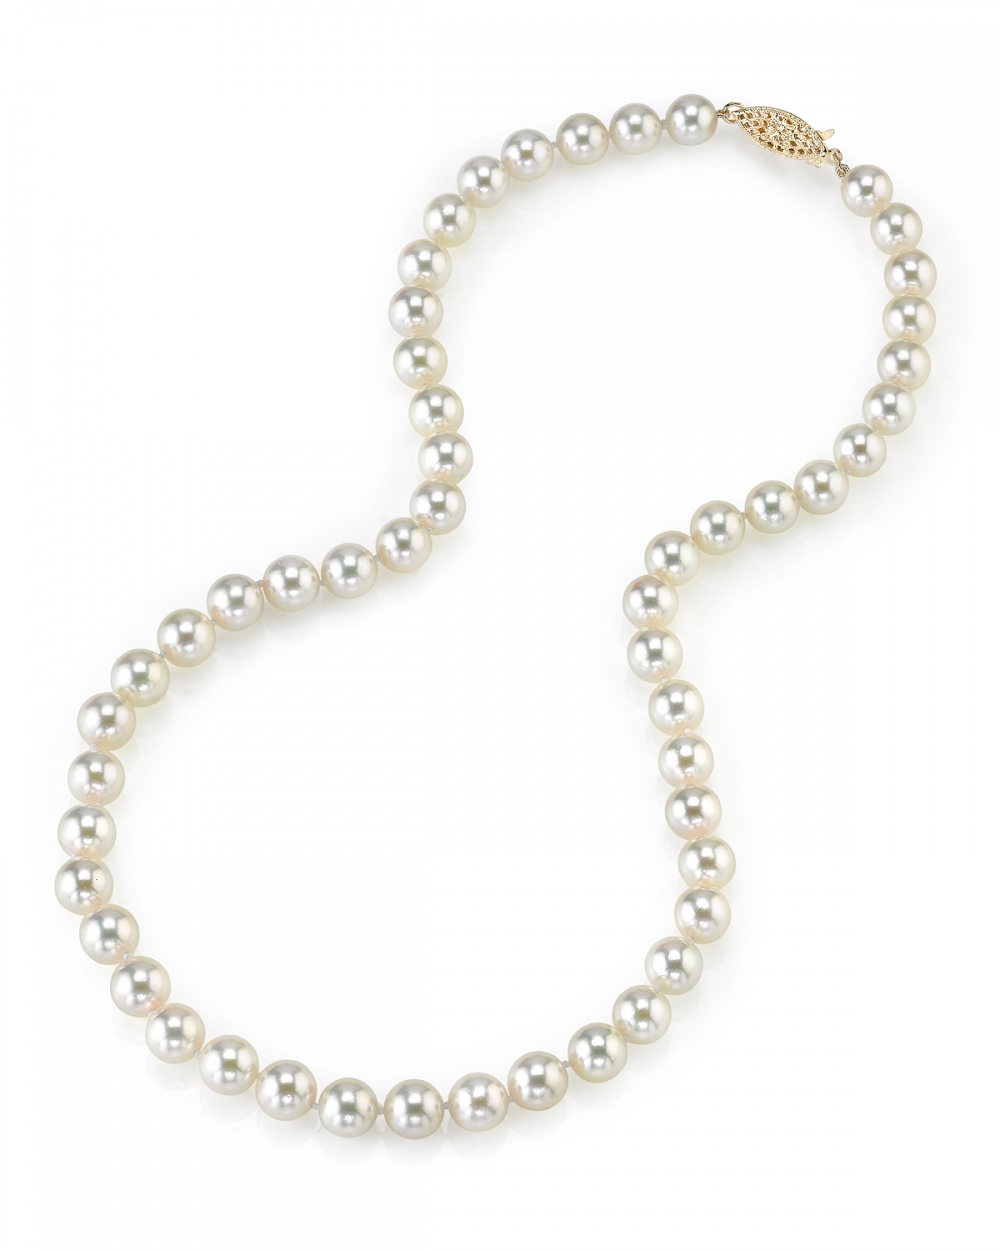 7.0-7.5mm japanese akoya white pearl necklace- aaa quality IUNFRGK